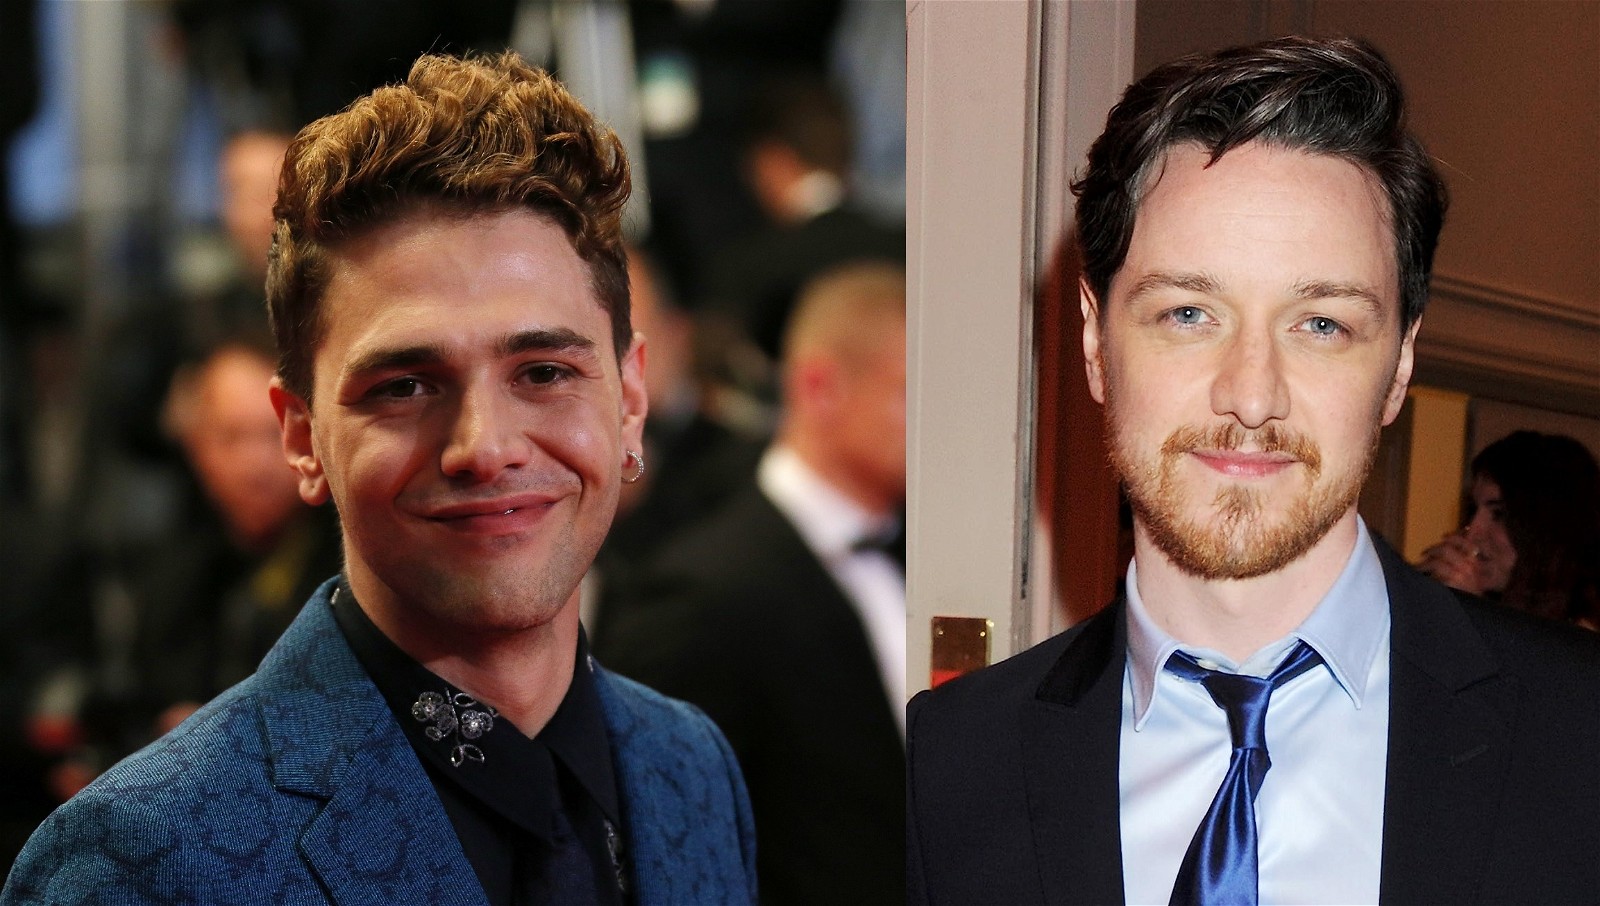 Xavier Dolan joined a cast that included James McAvoy, Bill Hader, and others